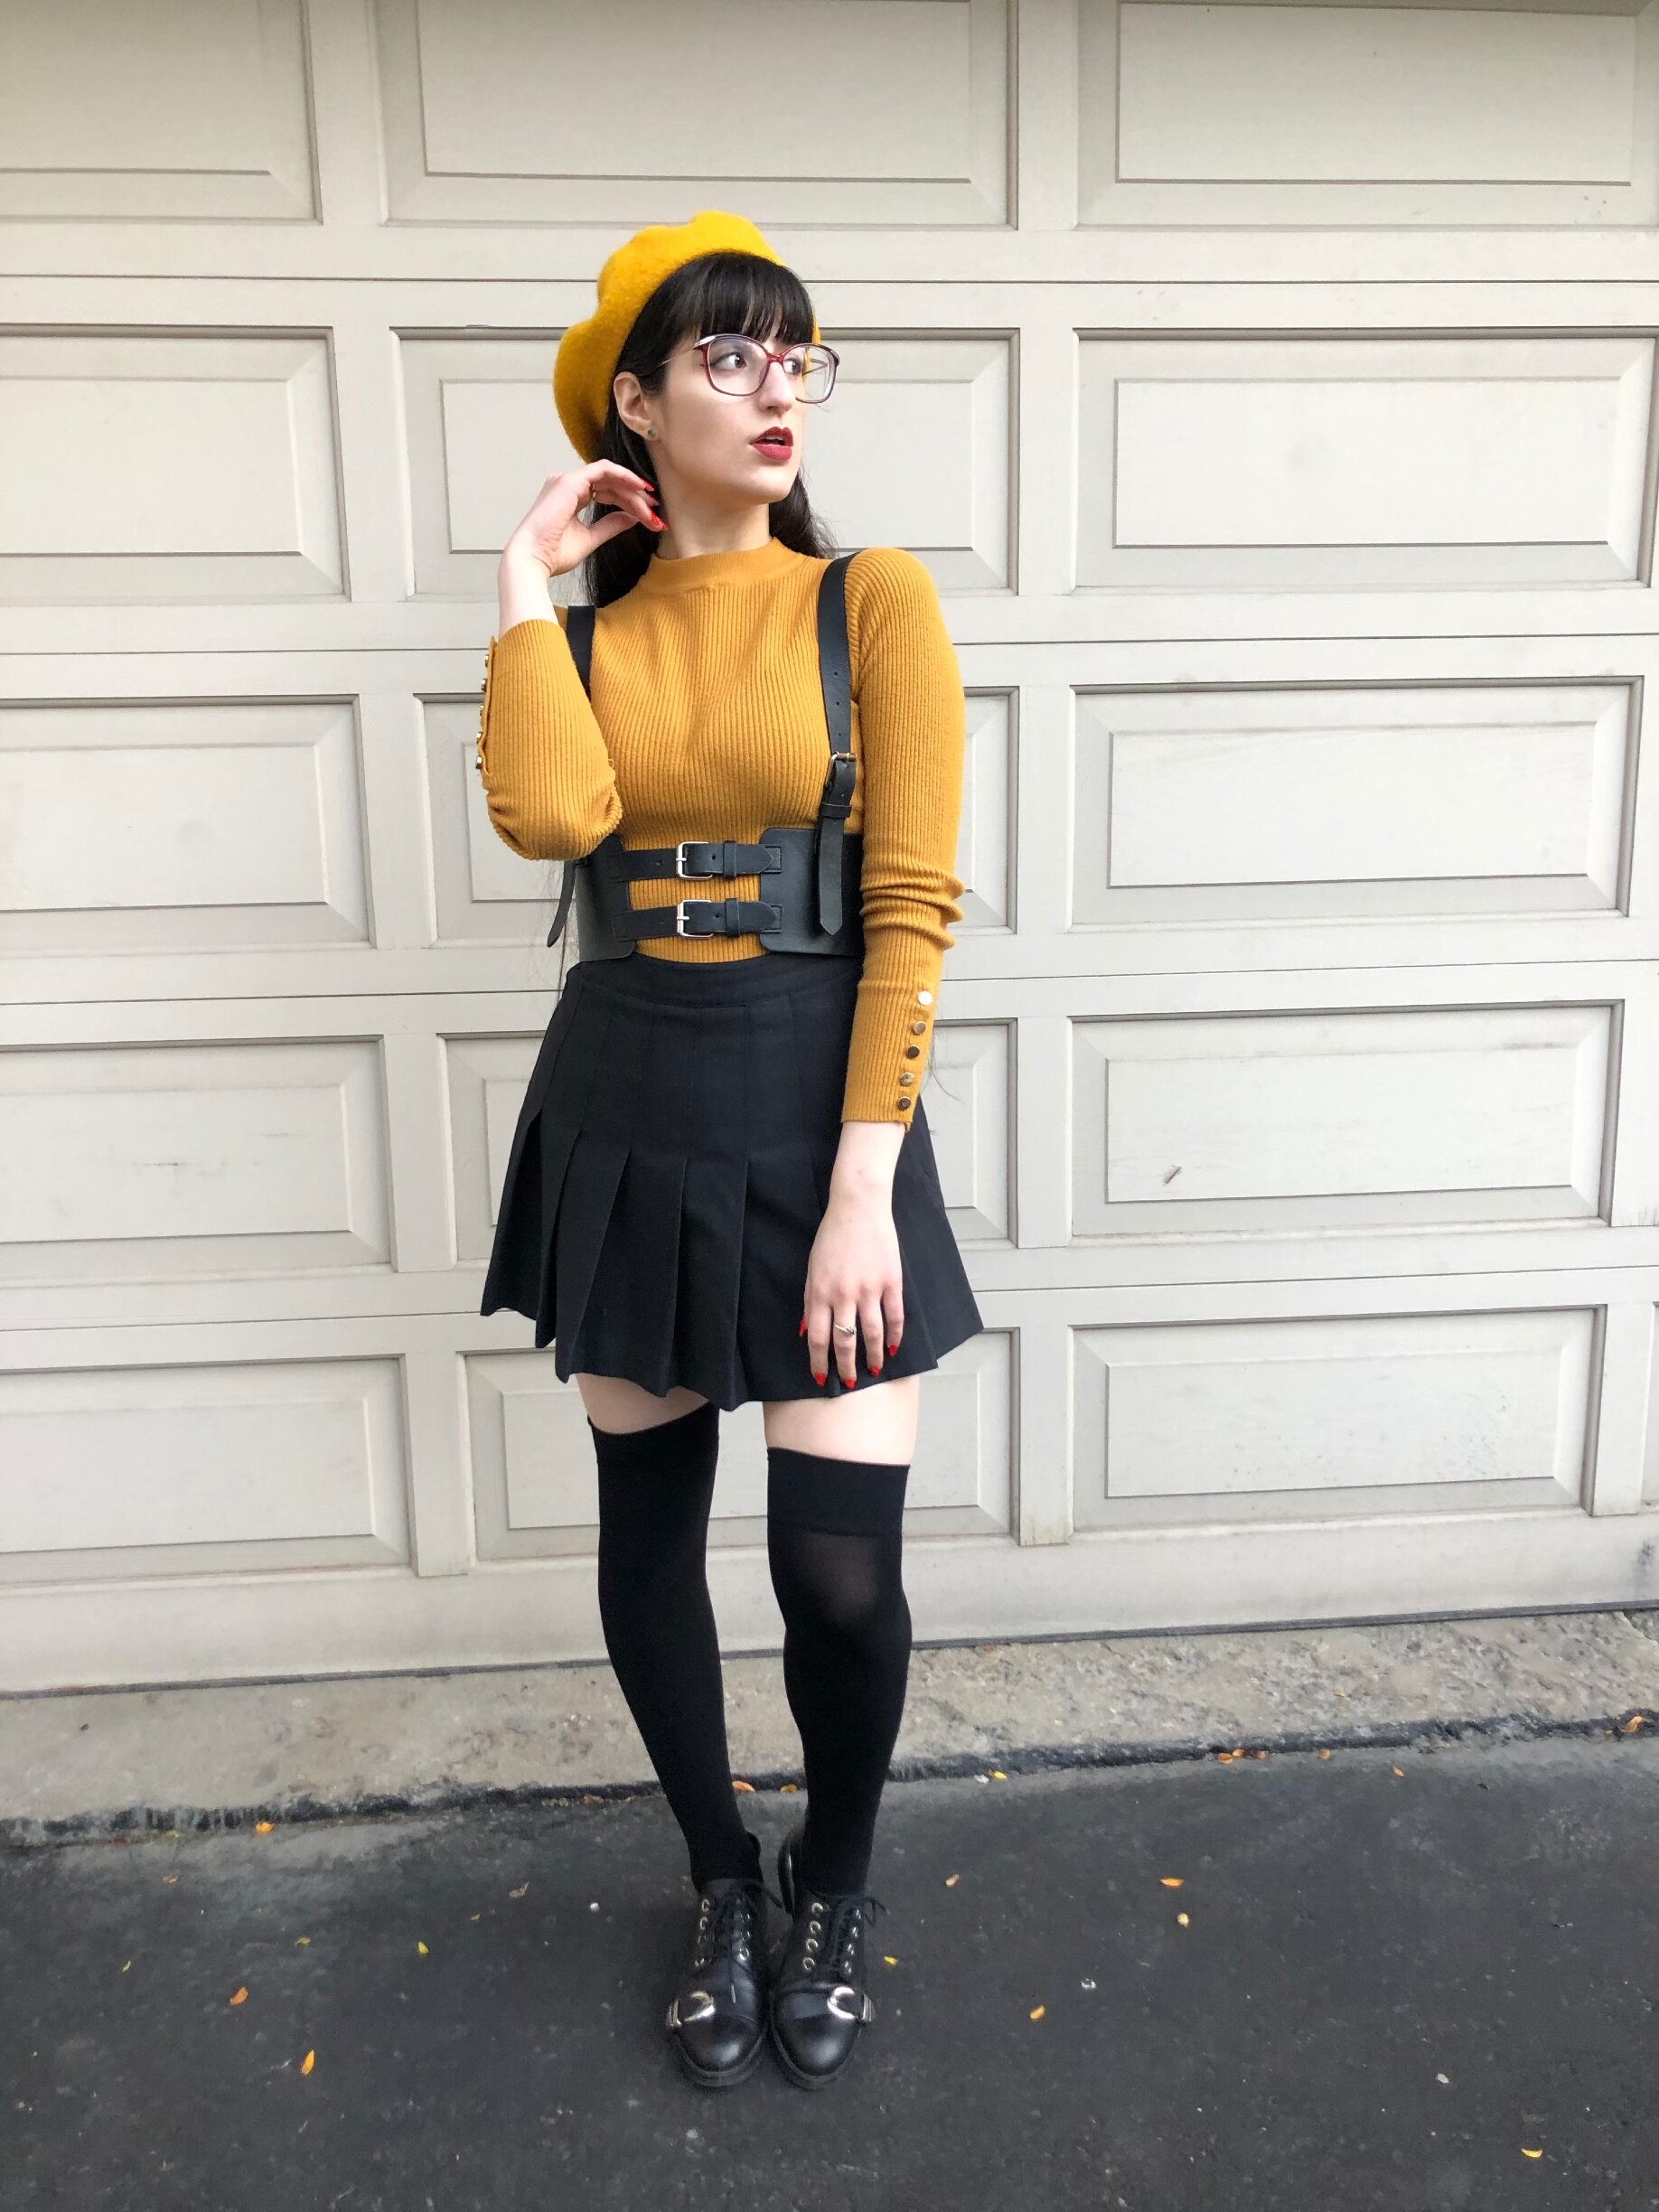 breanna williamson recommends Skirt With Thigh Highs